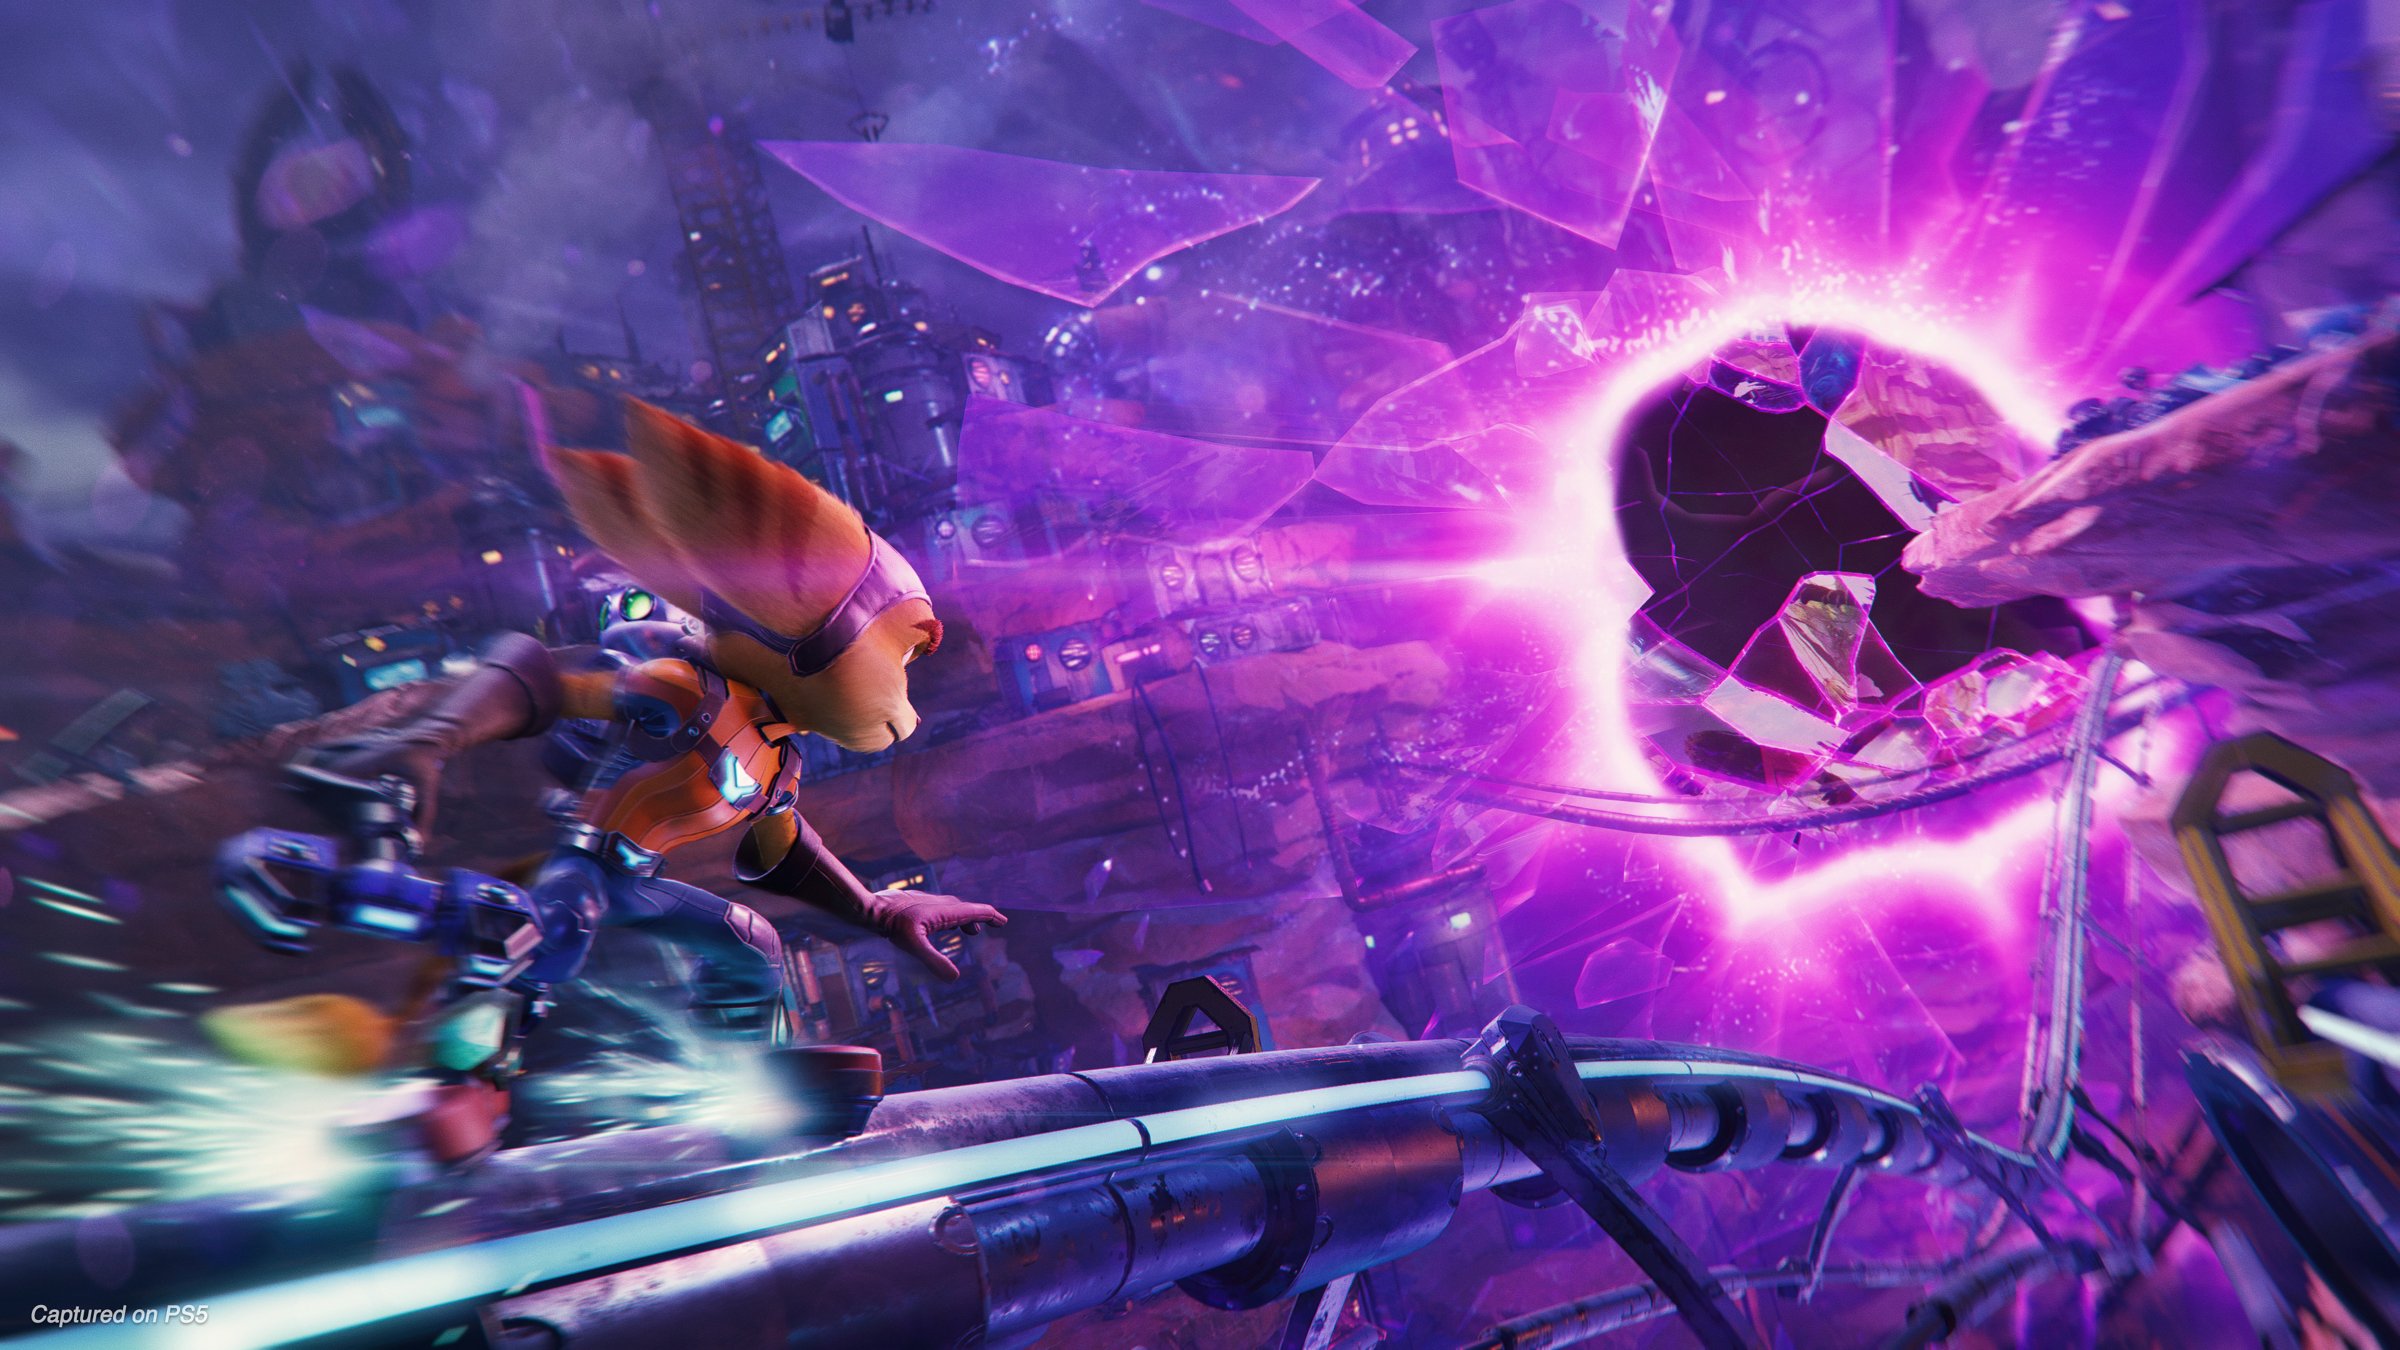 2021 video game releases - Ratchet & Clank: Rift Apart